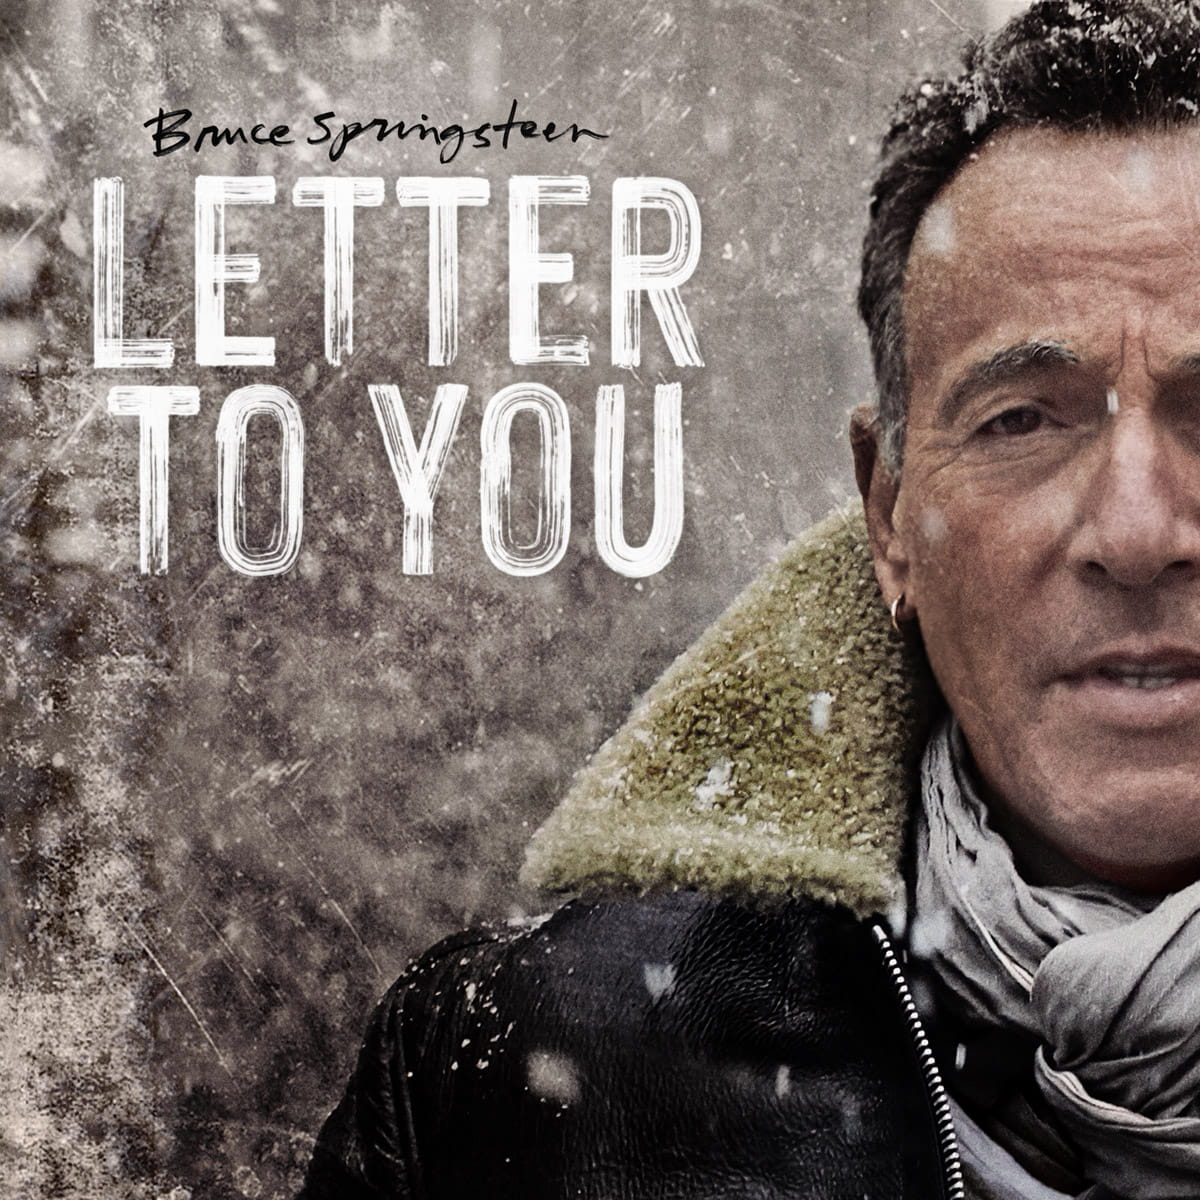 Bruce Springsteen Letter To You album front cover